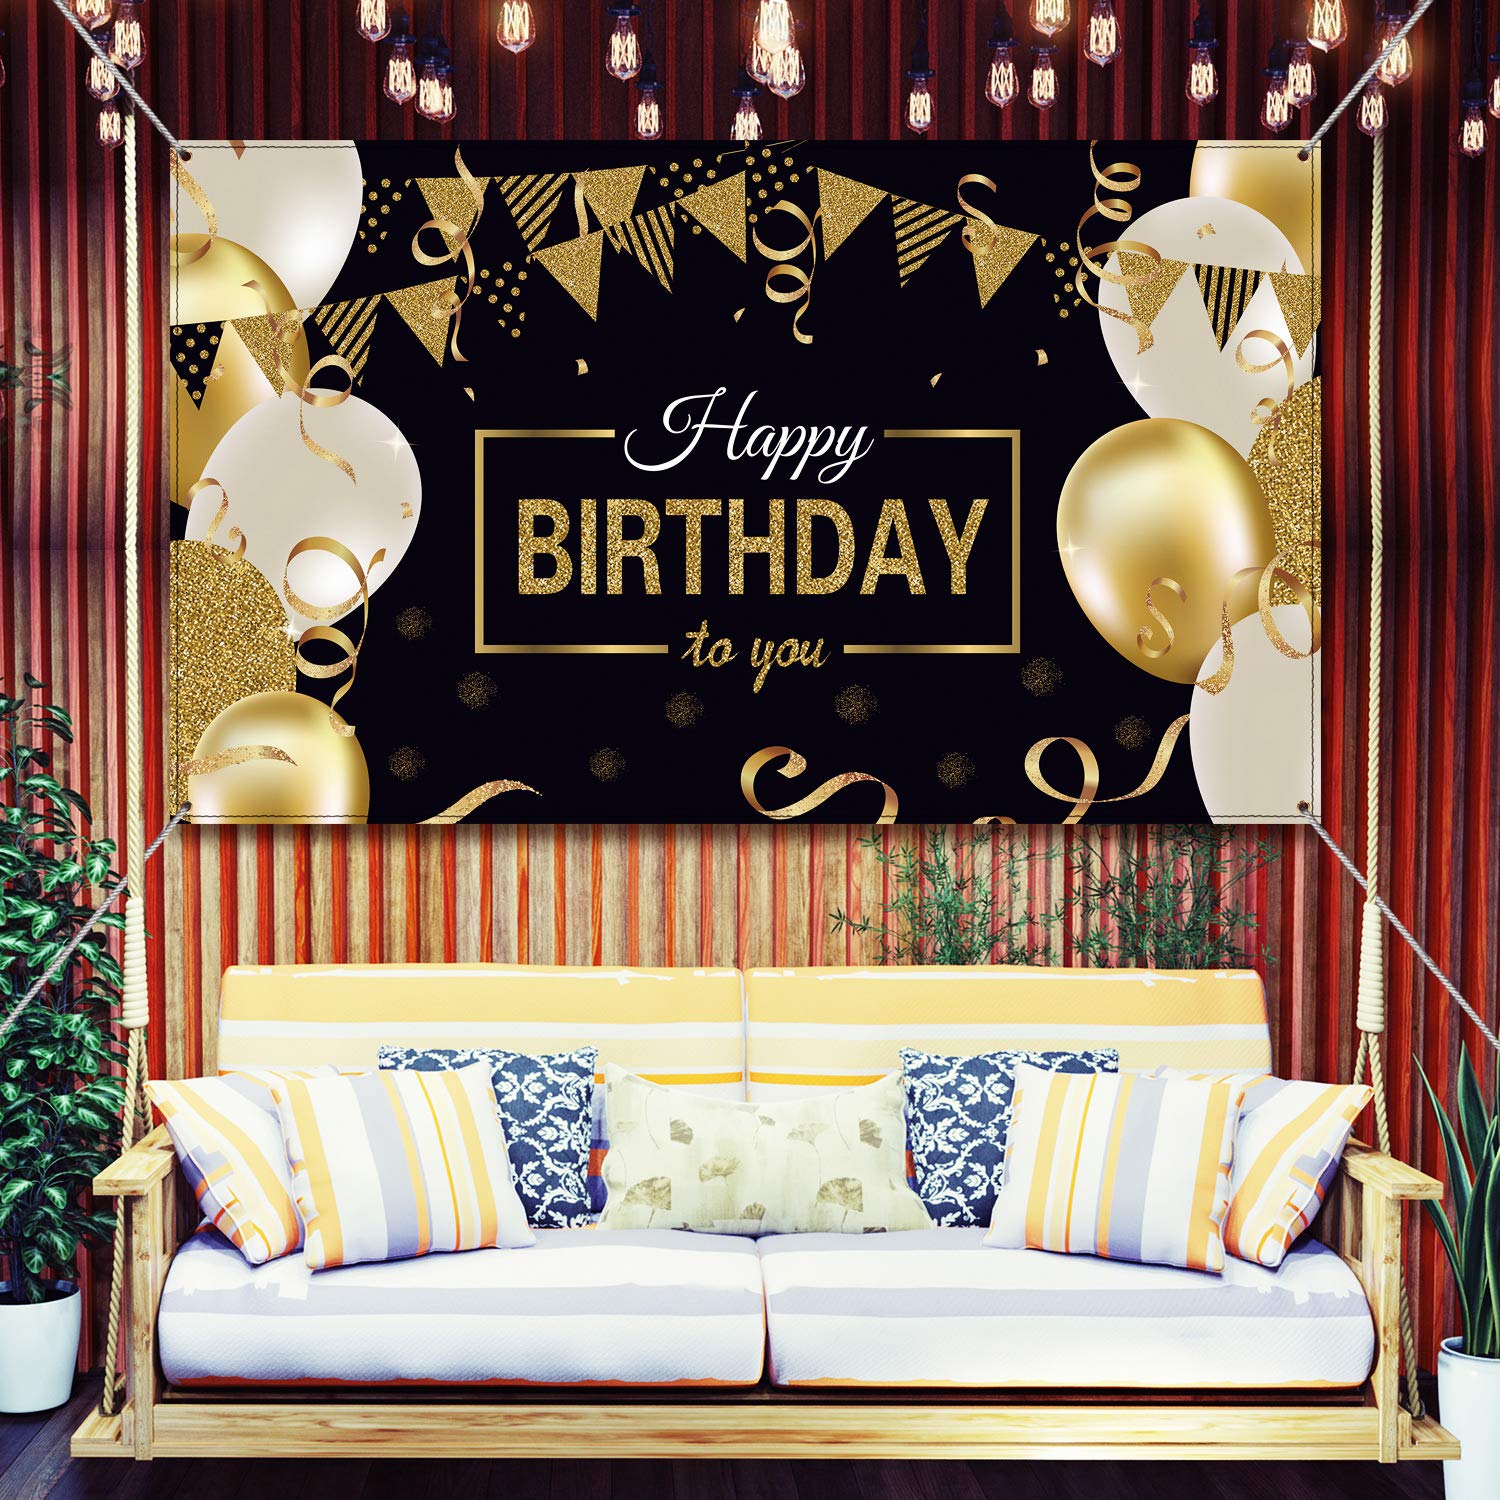 Happy Birthday Backdrop Banner Extra Large Black and Gold Sign Poster for Men Women Birthday Anniversary Party Photo Booth Backdrop Background Banner Decoration Supplies